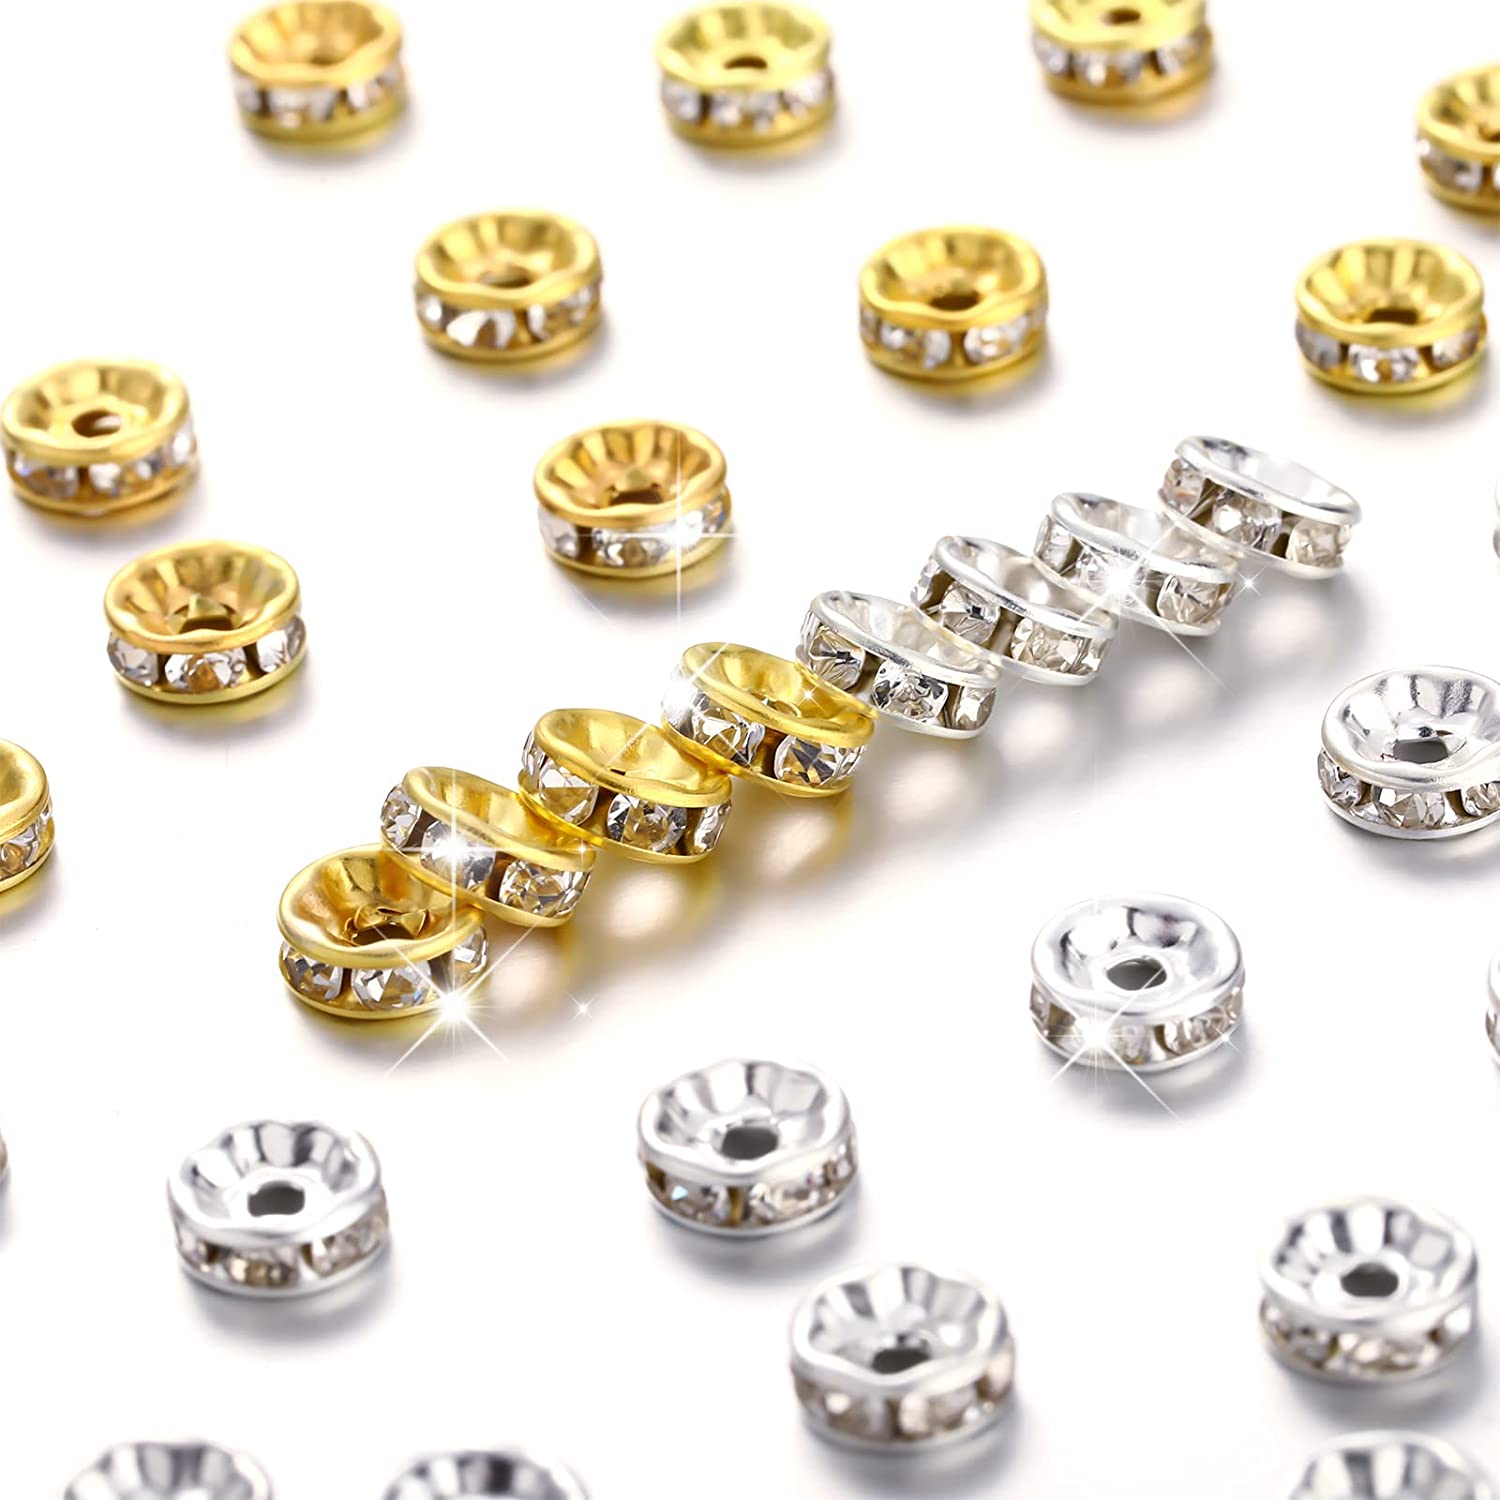 Loose Beads Gold Silver Spacer  Color Silver Gold Spacer Beads